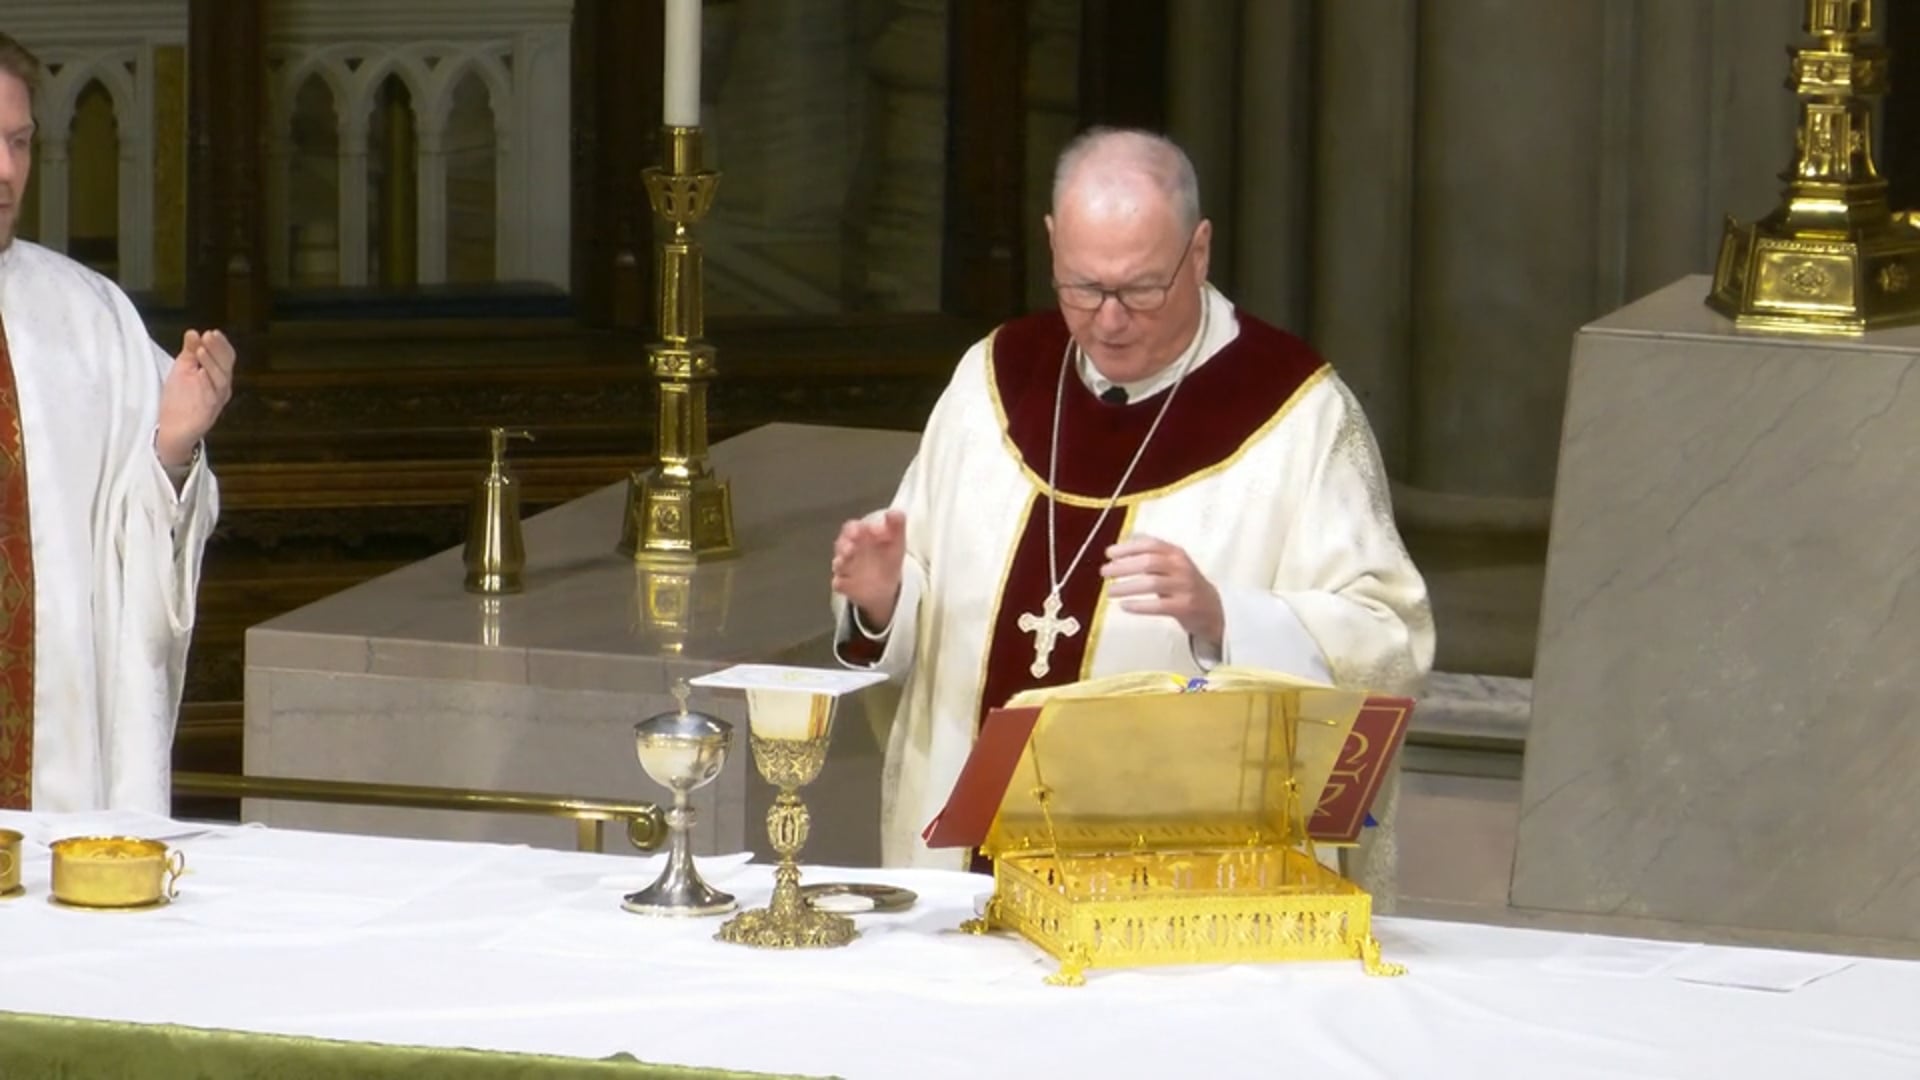 Mass from St. Patrick's Cathedral - January 27, 2023